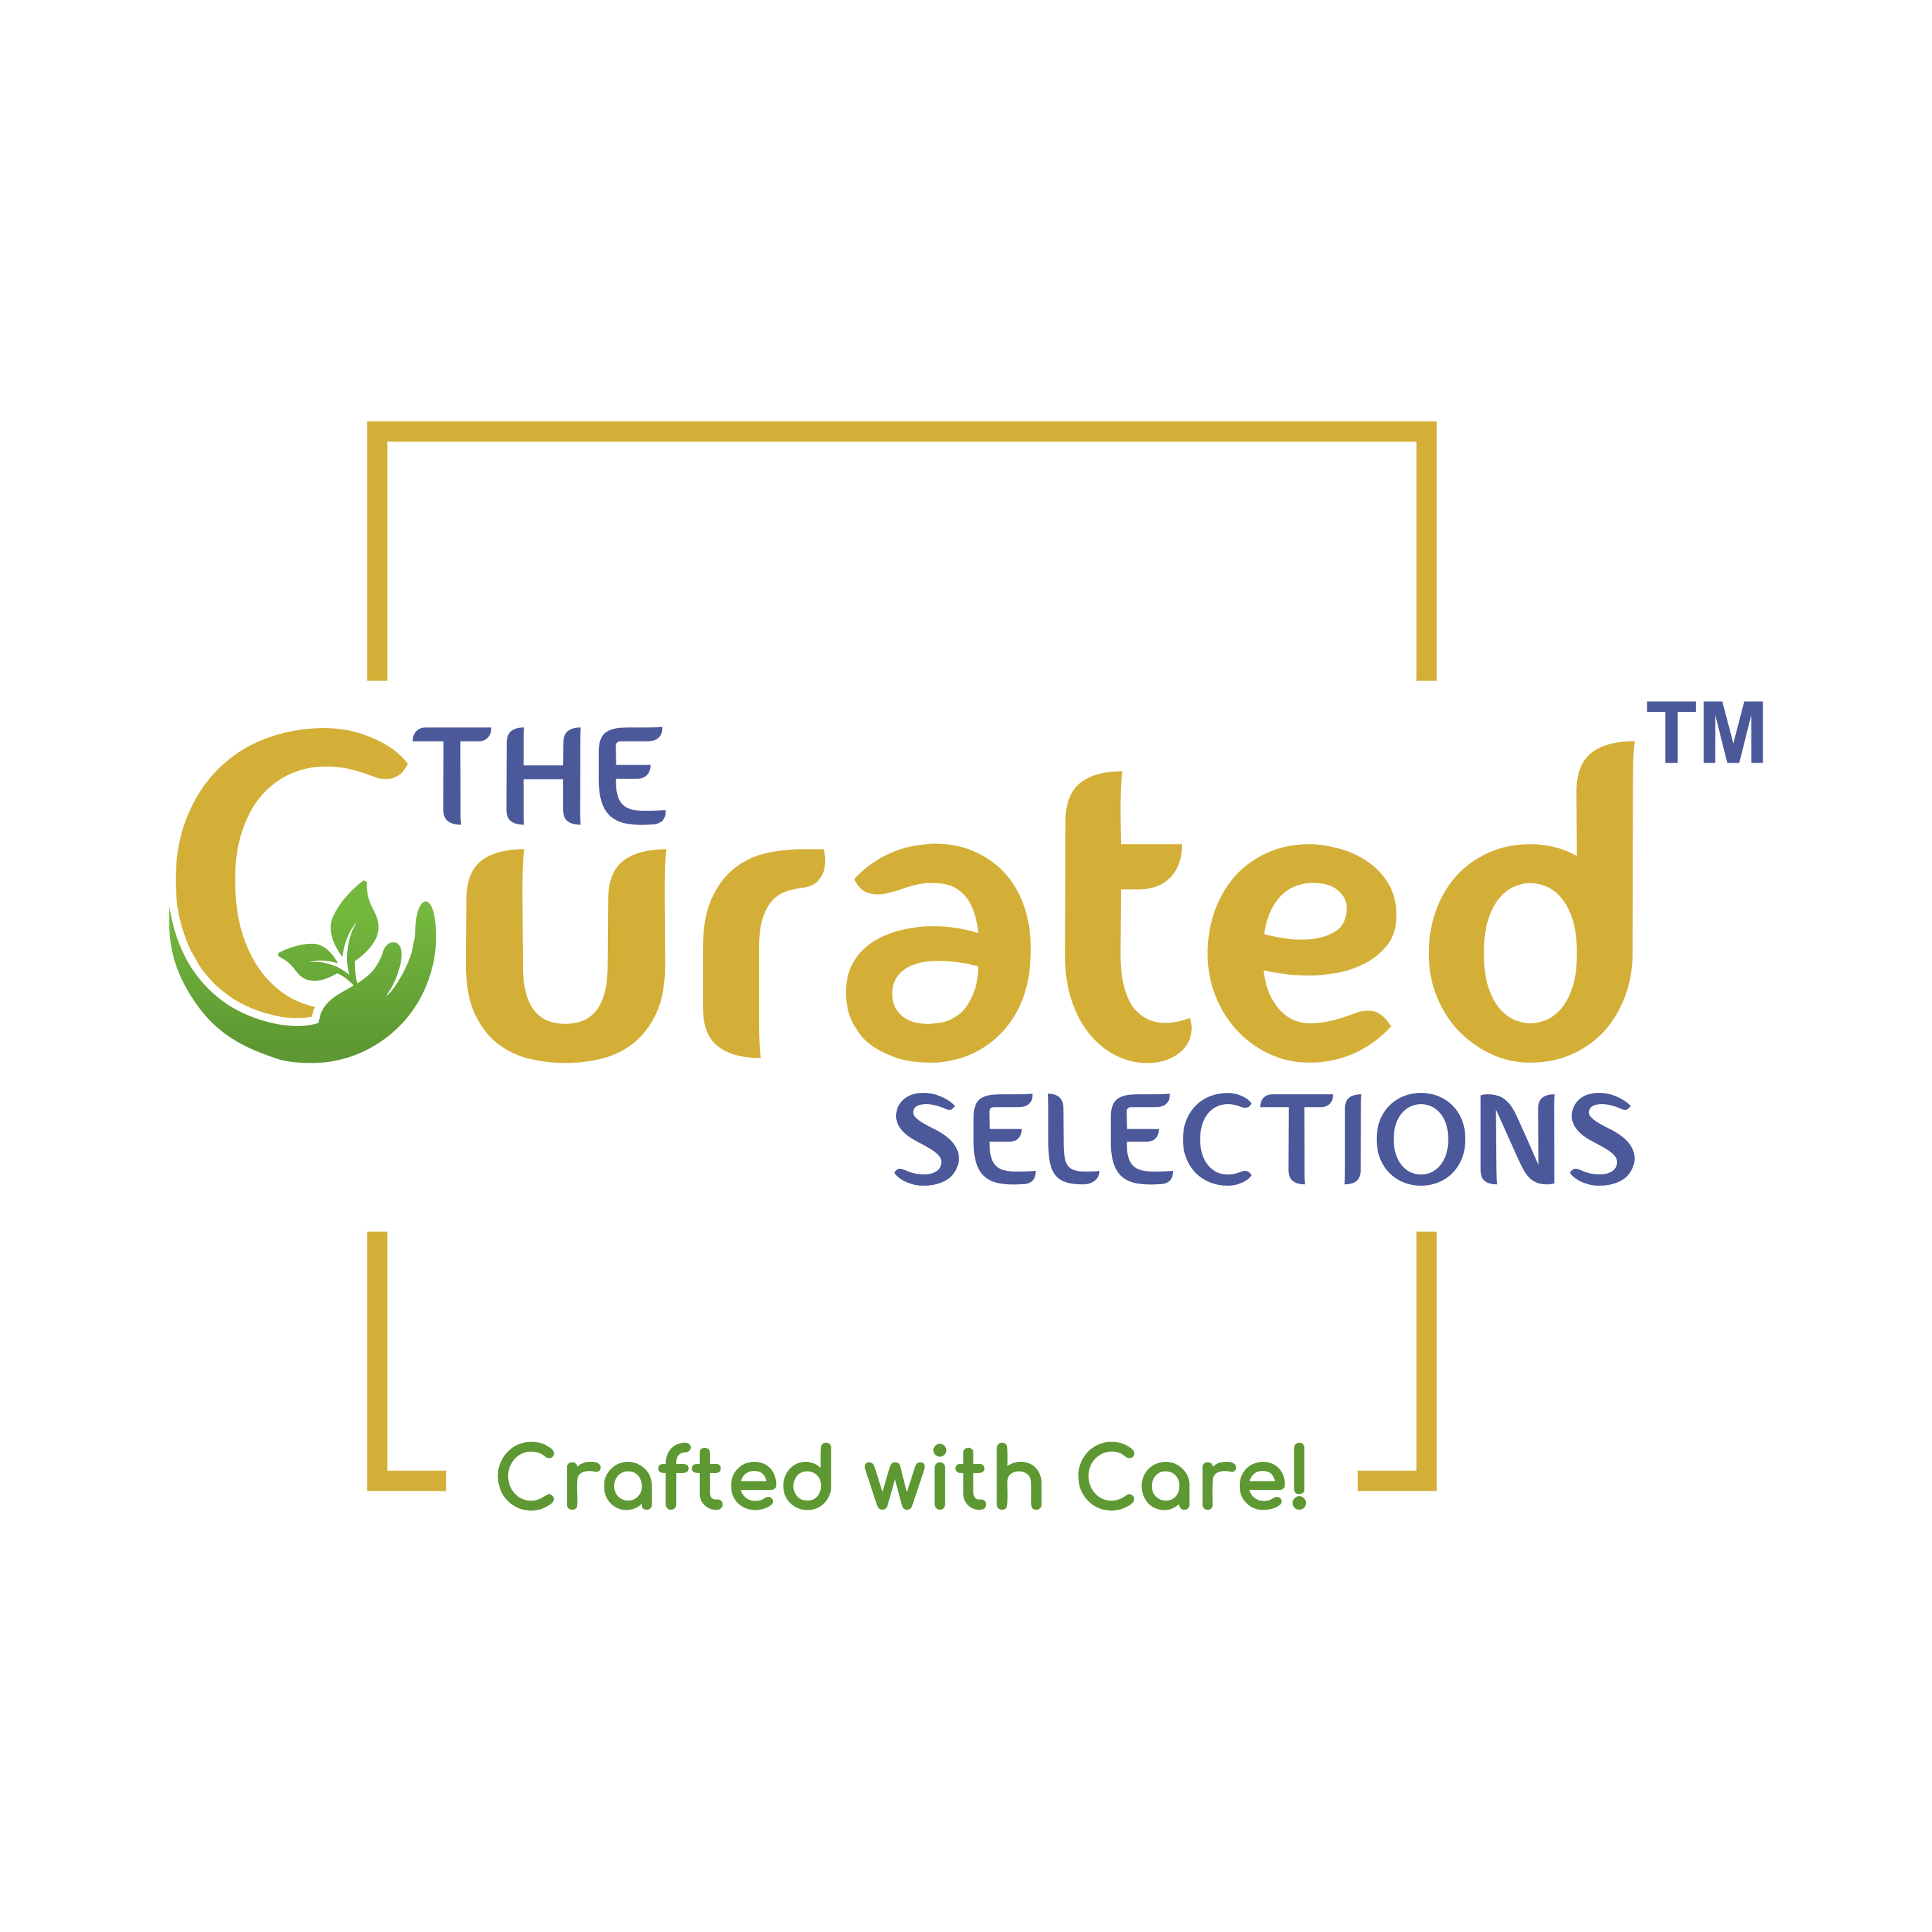 The curated selections